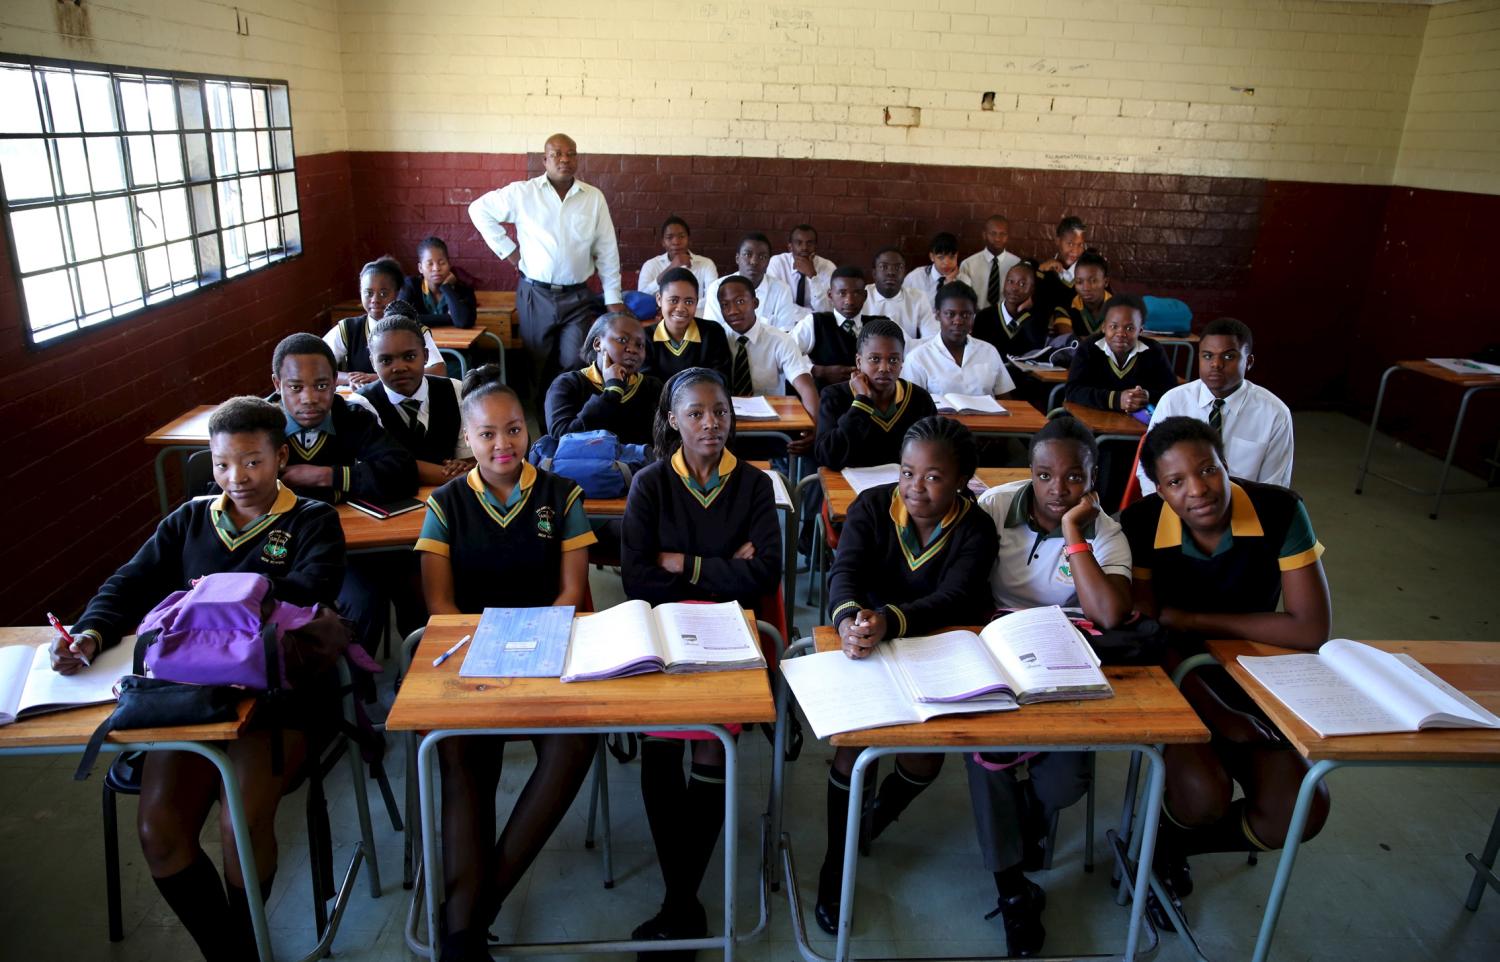 Teacher Reginald Sikhwari poses for a picture with his class of grade 11 students at Sekano-Ntoane school in Soweto, South Africa, September 17, 2015. Nearly three years after Taliban gunmen shot Pakistani schoolgirl Malala Yousafzai, the teenage activist last week urged world leaders gathered in New York to help millions more children go to school. World Teachers' Day falls on 5 October, a Unesco initiative highlighting the work of educators struggling to teach children amid intimidation in Pakistan, conflict in Syria or poverty in Vietnam. Even so, there have been some improvements: the number of children not attending primary school has plummeted to an estimated 57 million worldwide in 2015, the U.N. says, down from 100 million 15 years ago. Reuters photographers have documented learning around the world, from well-resourced schools to pupils crammed into corridors in the Philippines, on boats in Brazil or in crowded classrooms in Burundi. REUTERS/Siphiwe Sibeko PICTURE 39 OF 47 FOR WIDER IMAGE STORY "SCHOOLS AROUND THE WORLD"SEARCH "EDUCATORS SCHOOLS" FOR ALL IMAGES